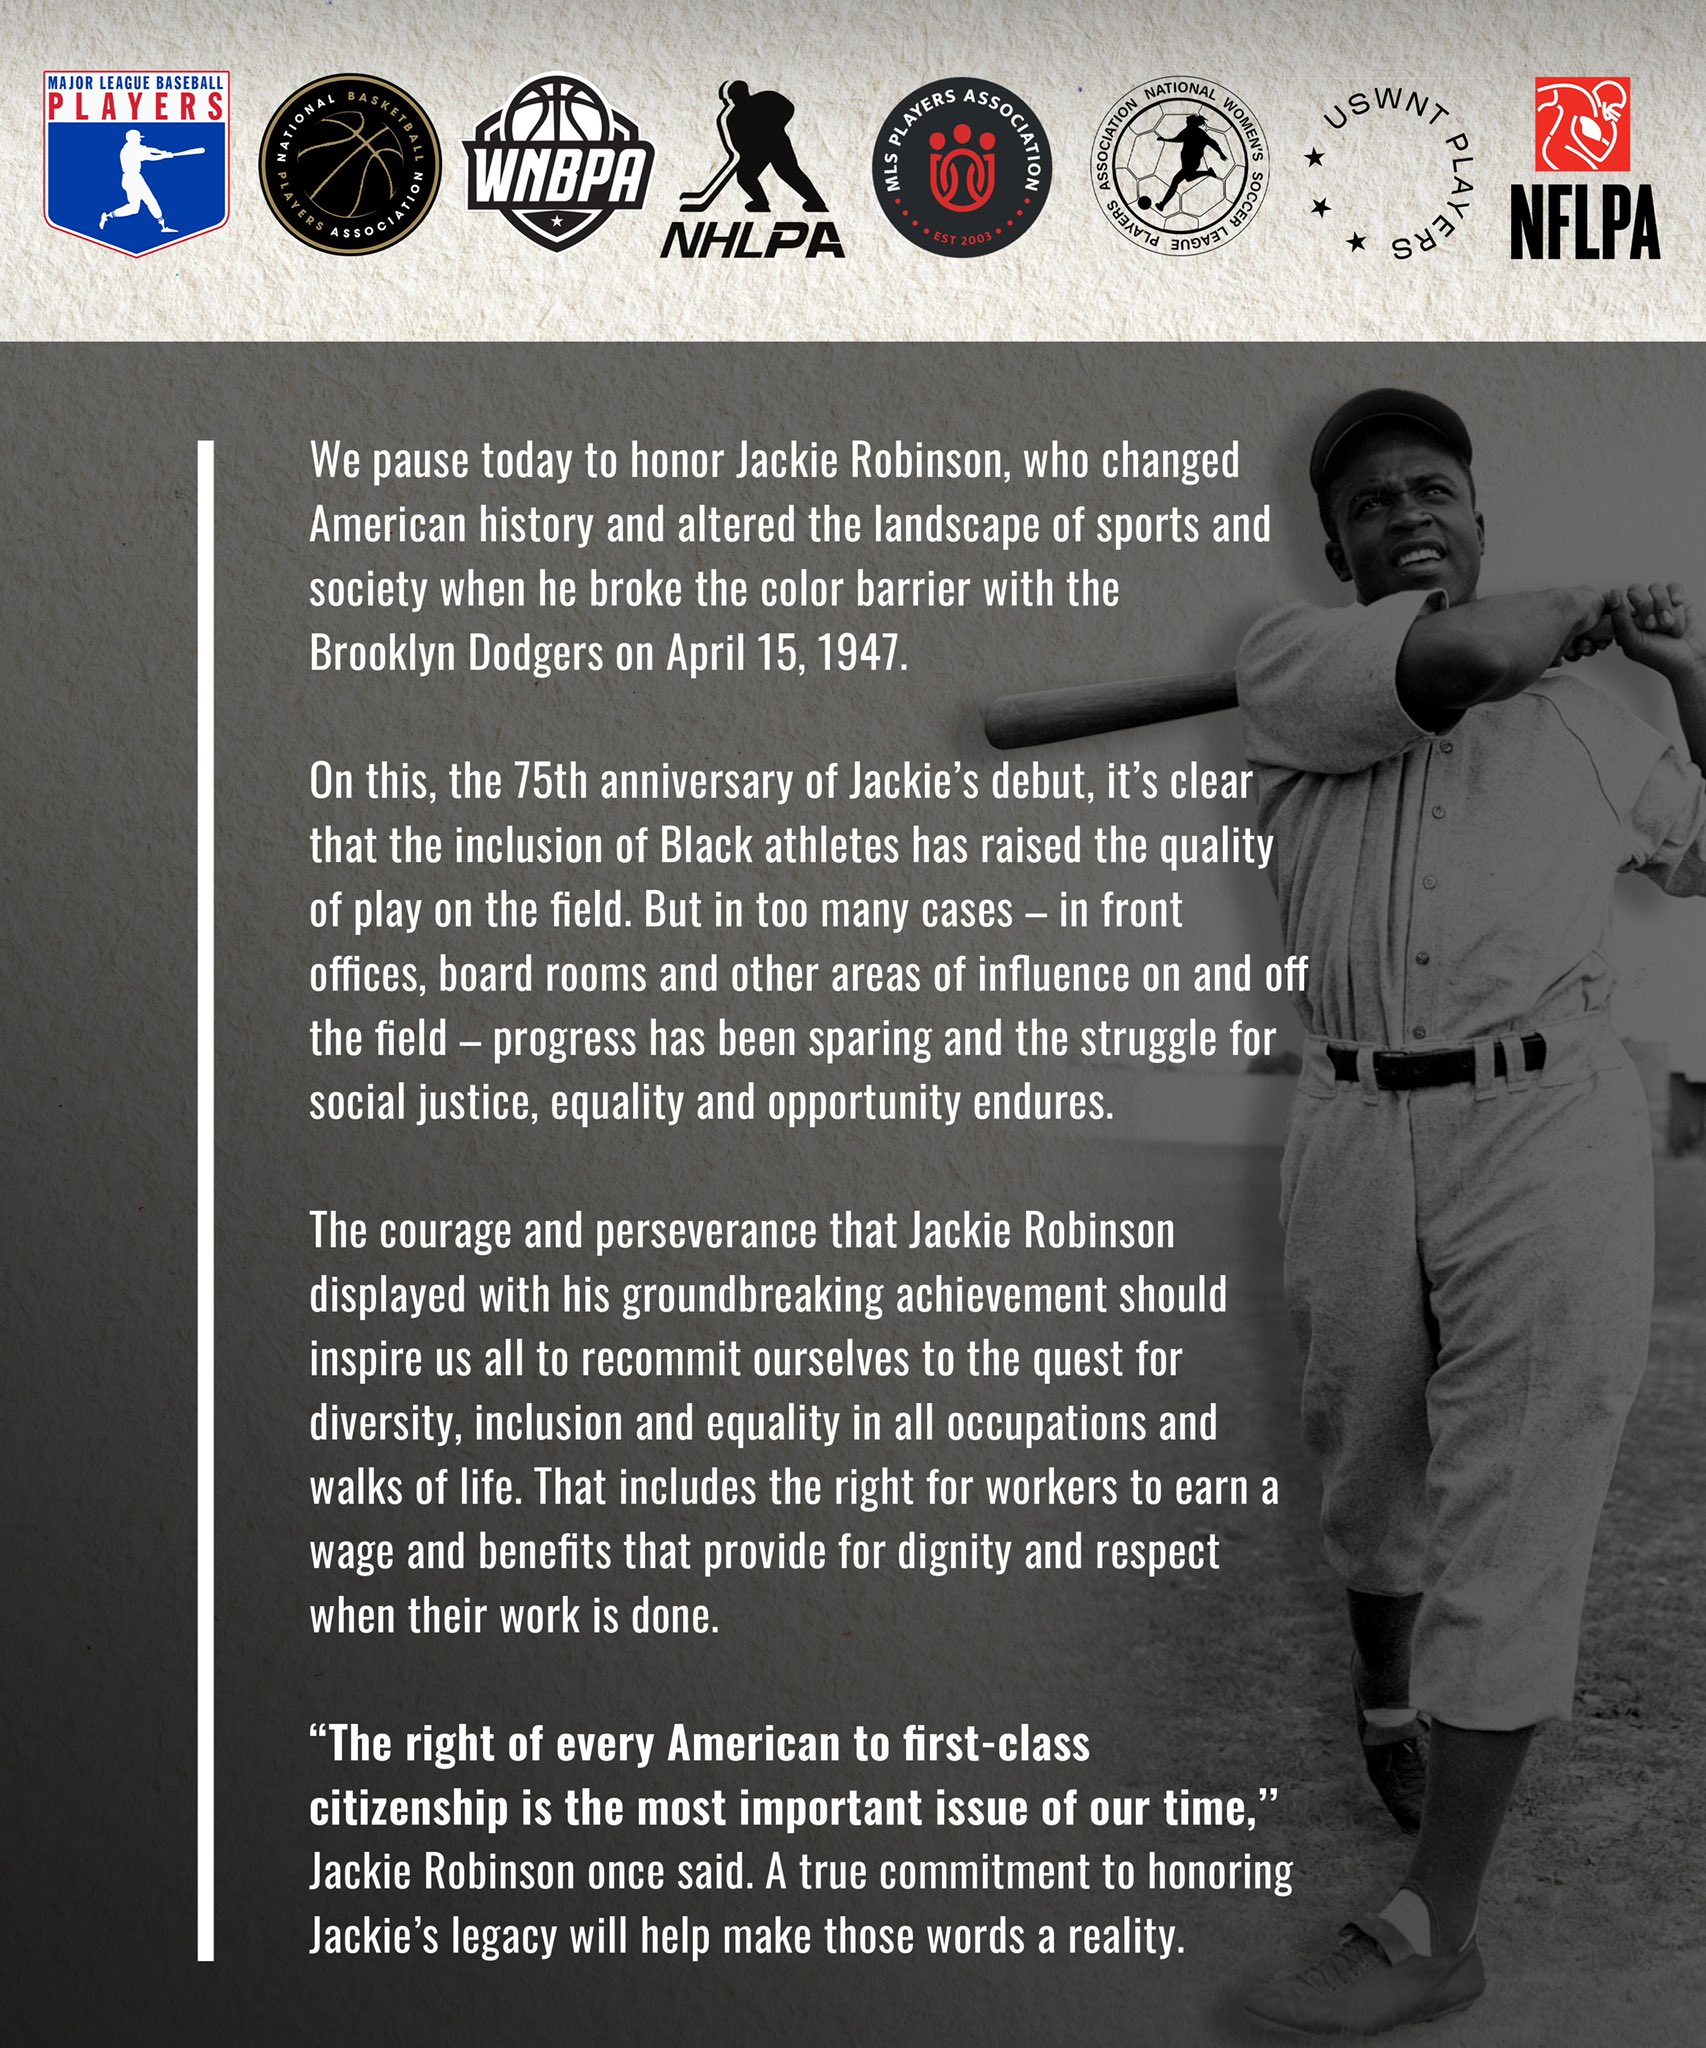 NWSLPA on Twitter: Players unions join today to honor Jackie Robinson,  multi-sport athlete, trailblazer & American icon. In the effort to  perpetuate Jackie's legacy and bring about real change, we recommit  ourselves